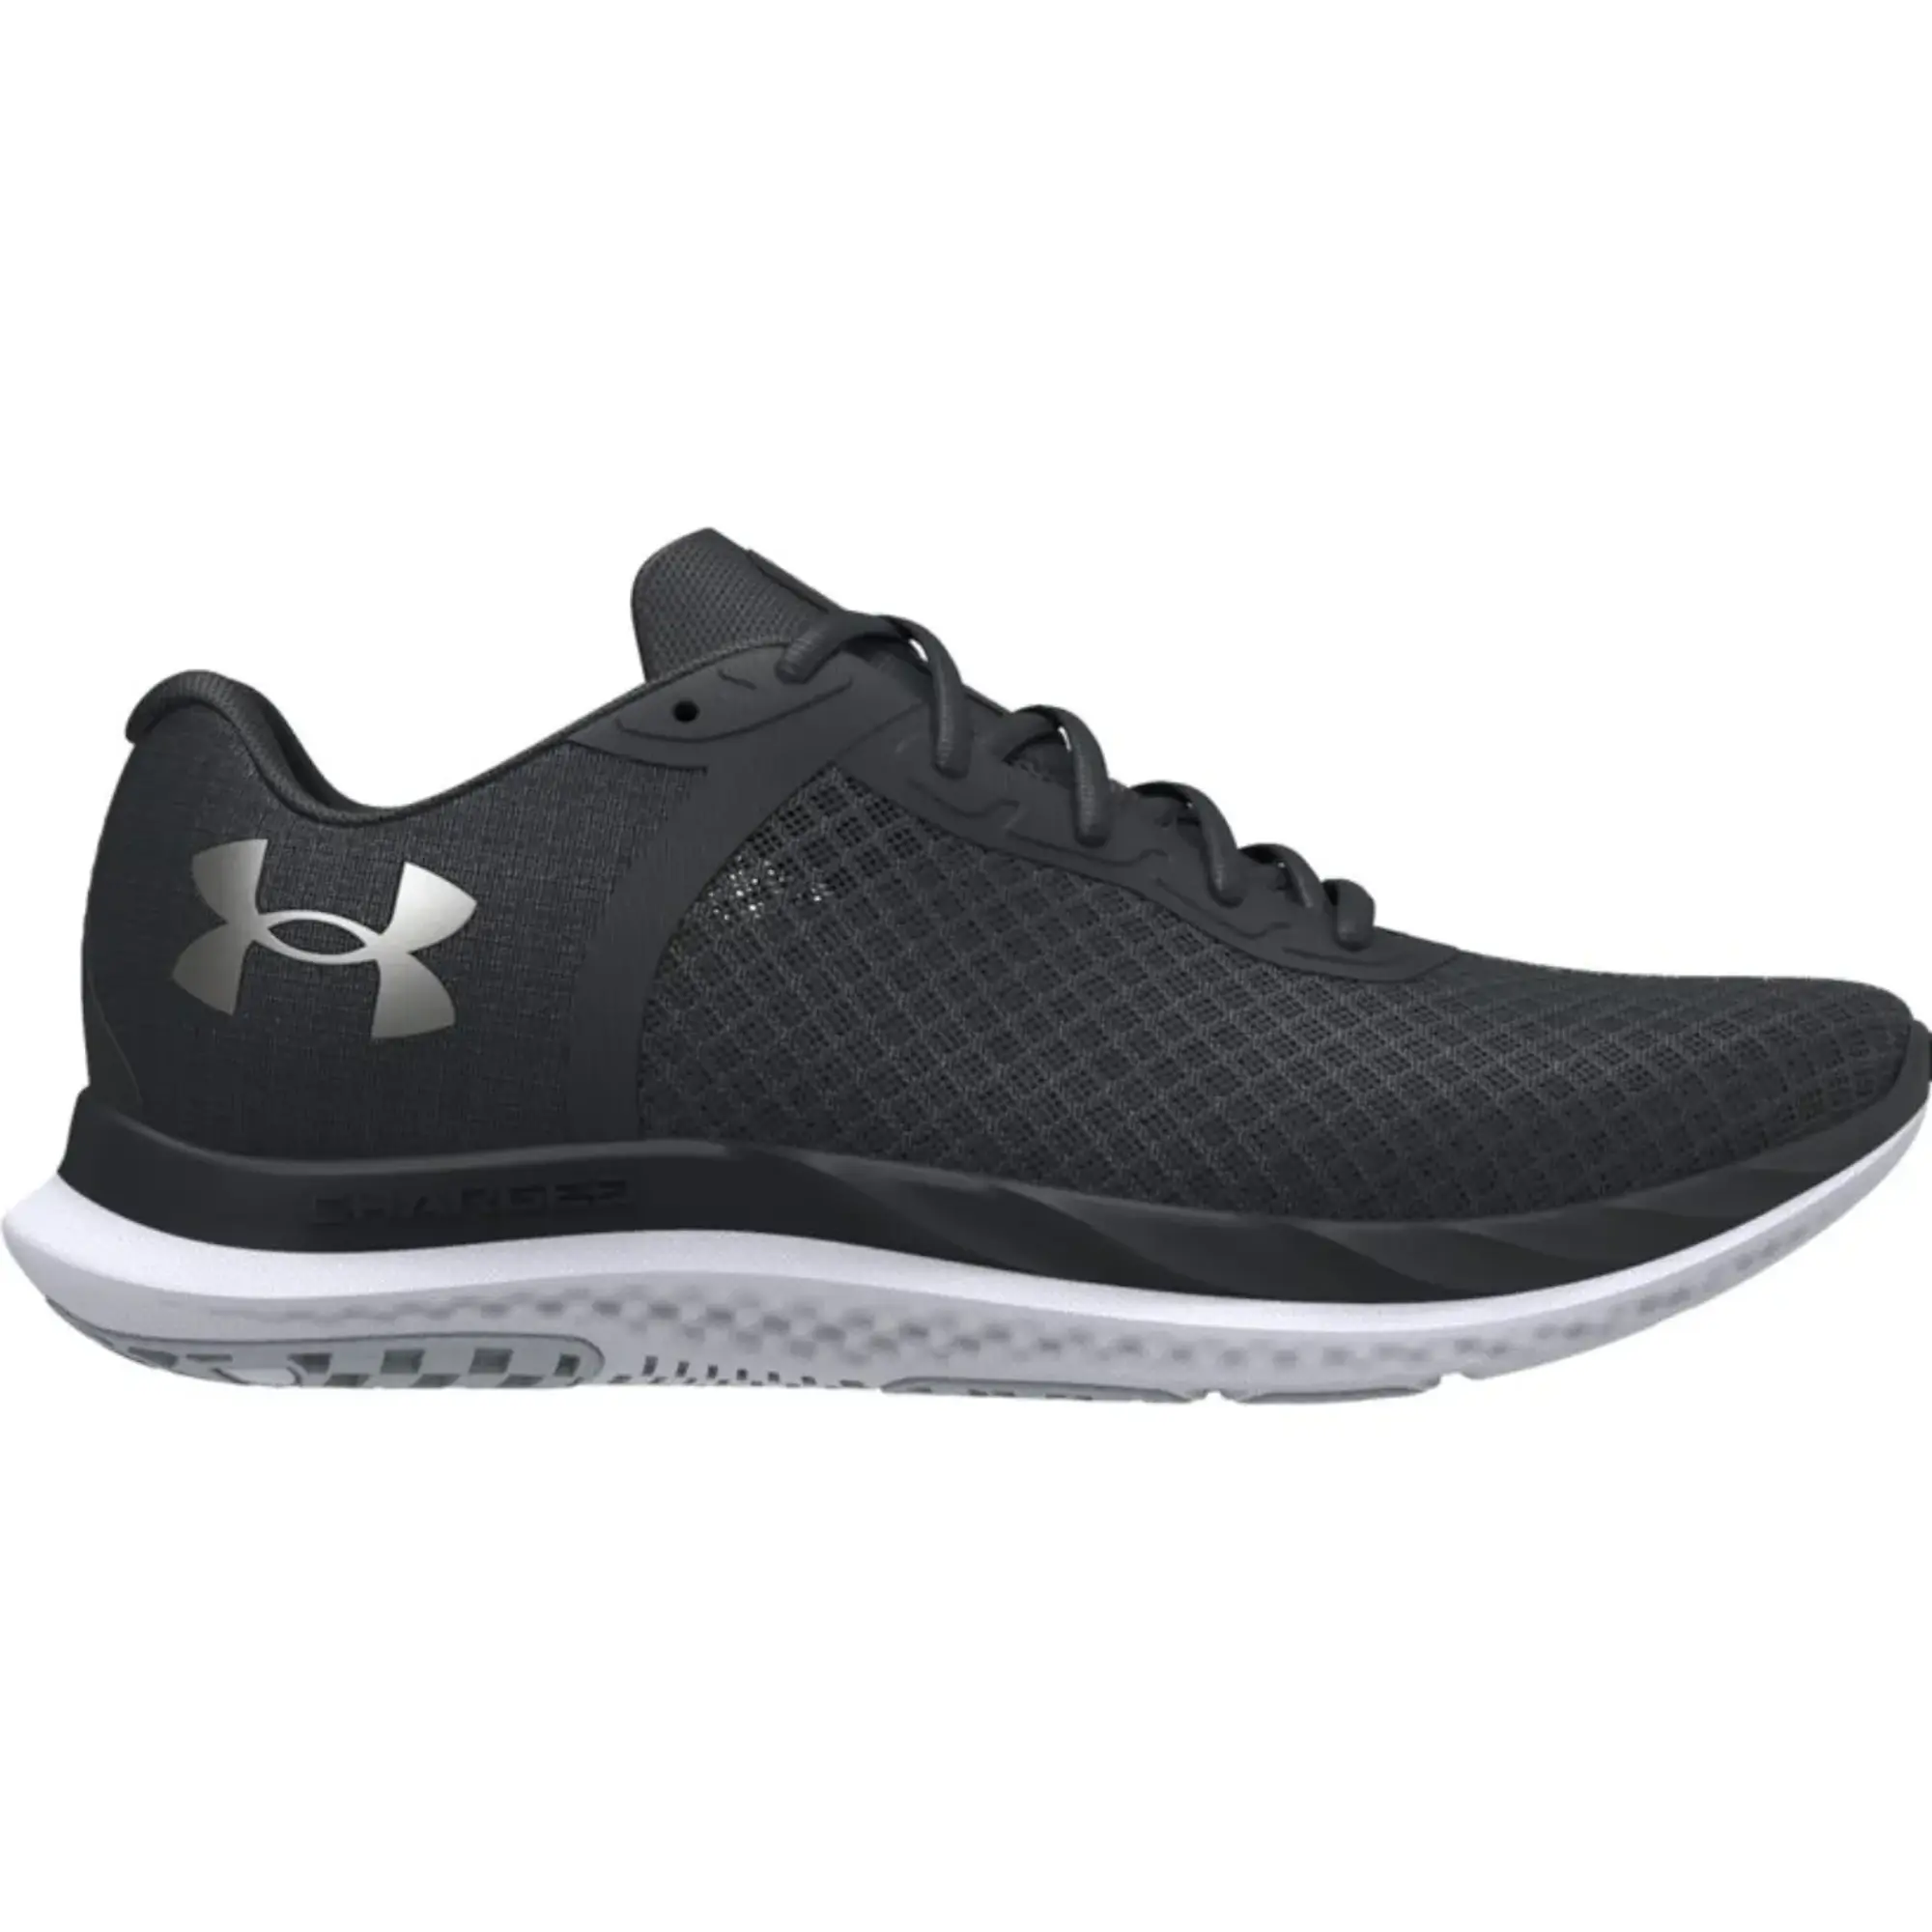 Under Armour Mens Charged Breeze Running Shoes - Black